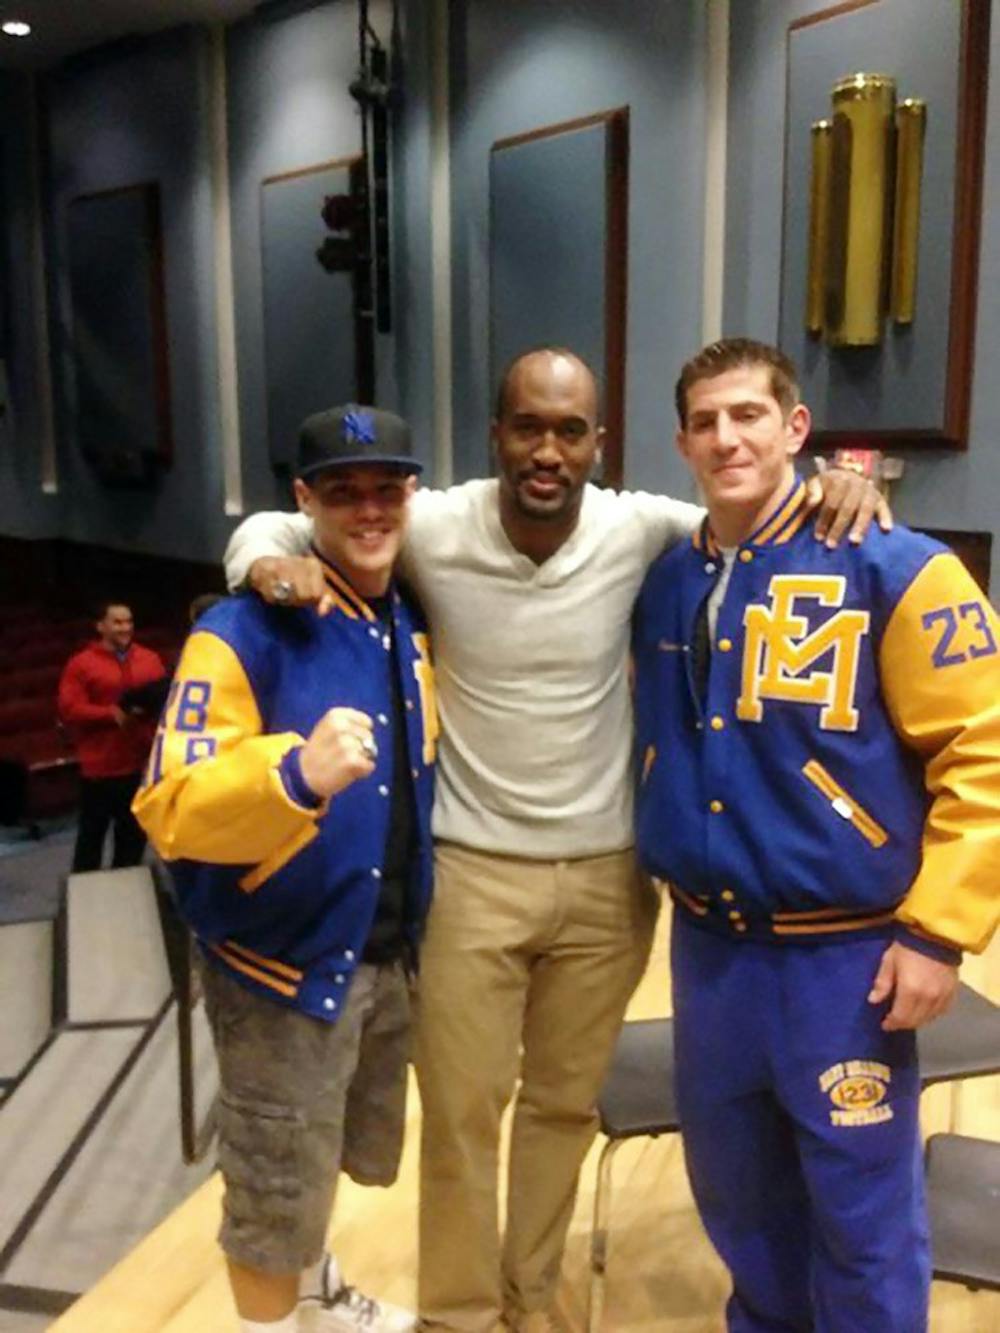 <p>Steven King (middle) poses with Andrew Lynch (left) and Evan Pantofel (right) while donning East Meadow lettermen jackets.</p>